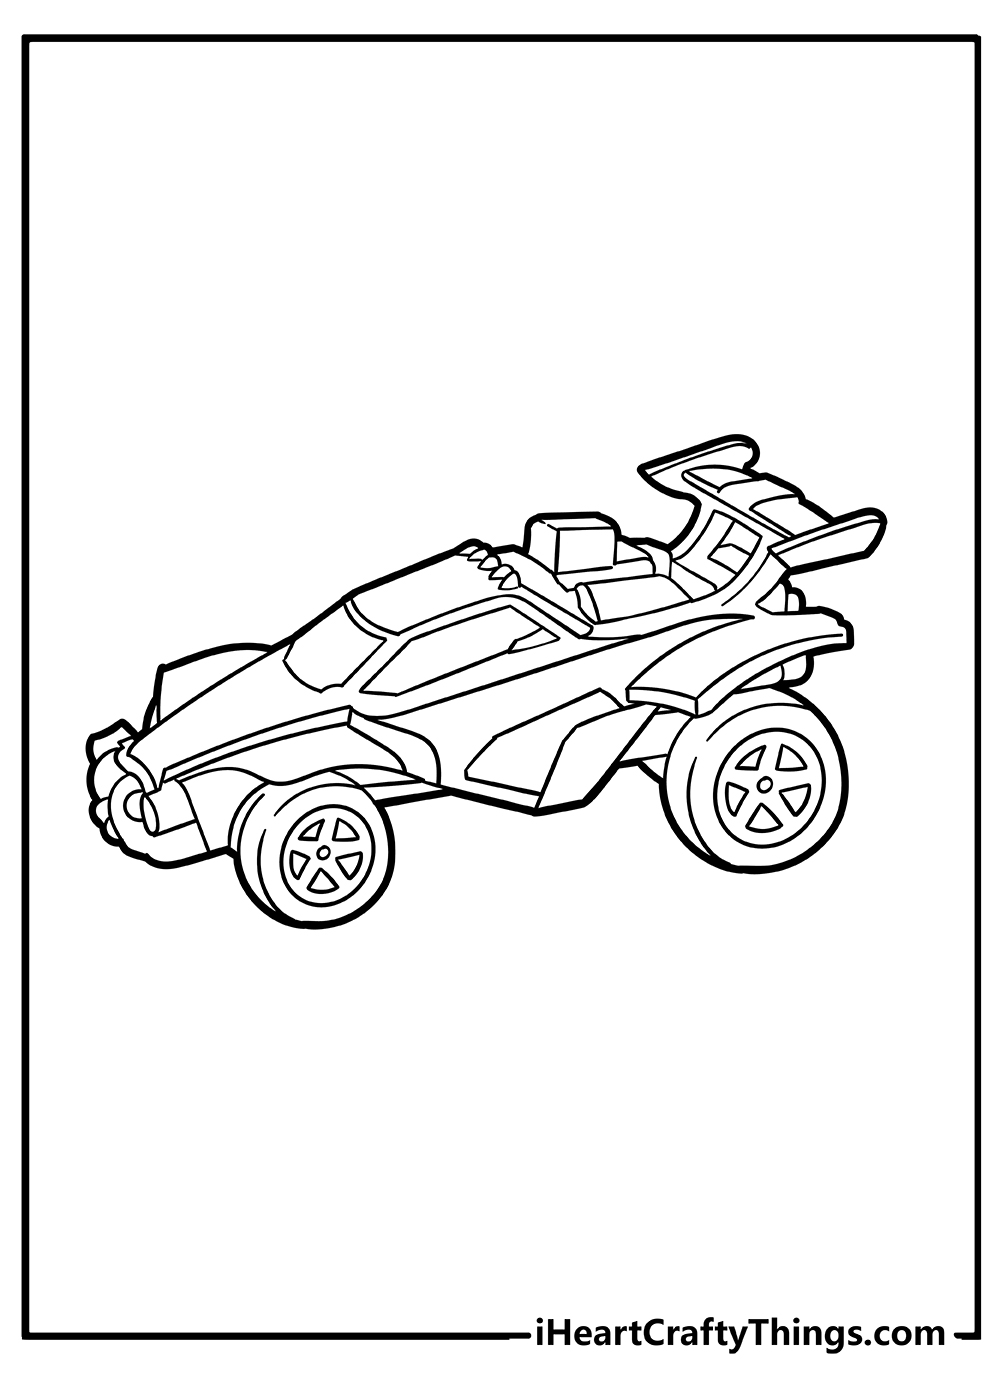 Hot Wheels Coloring Pages for preschoolers free printable